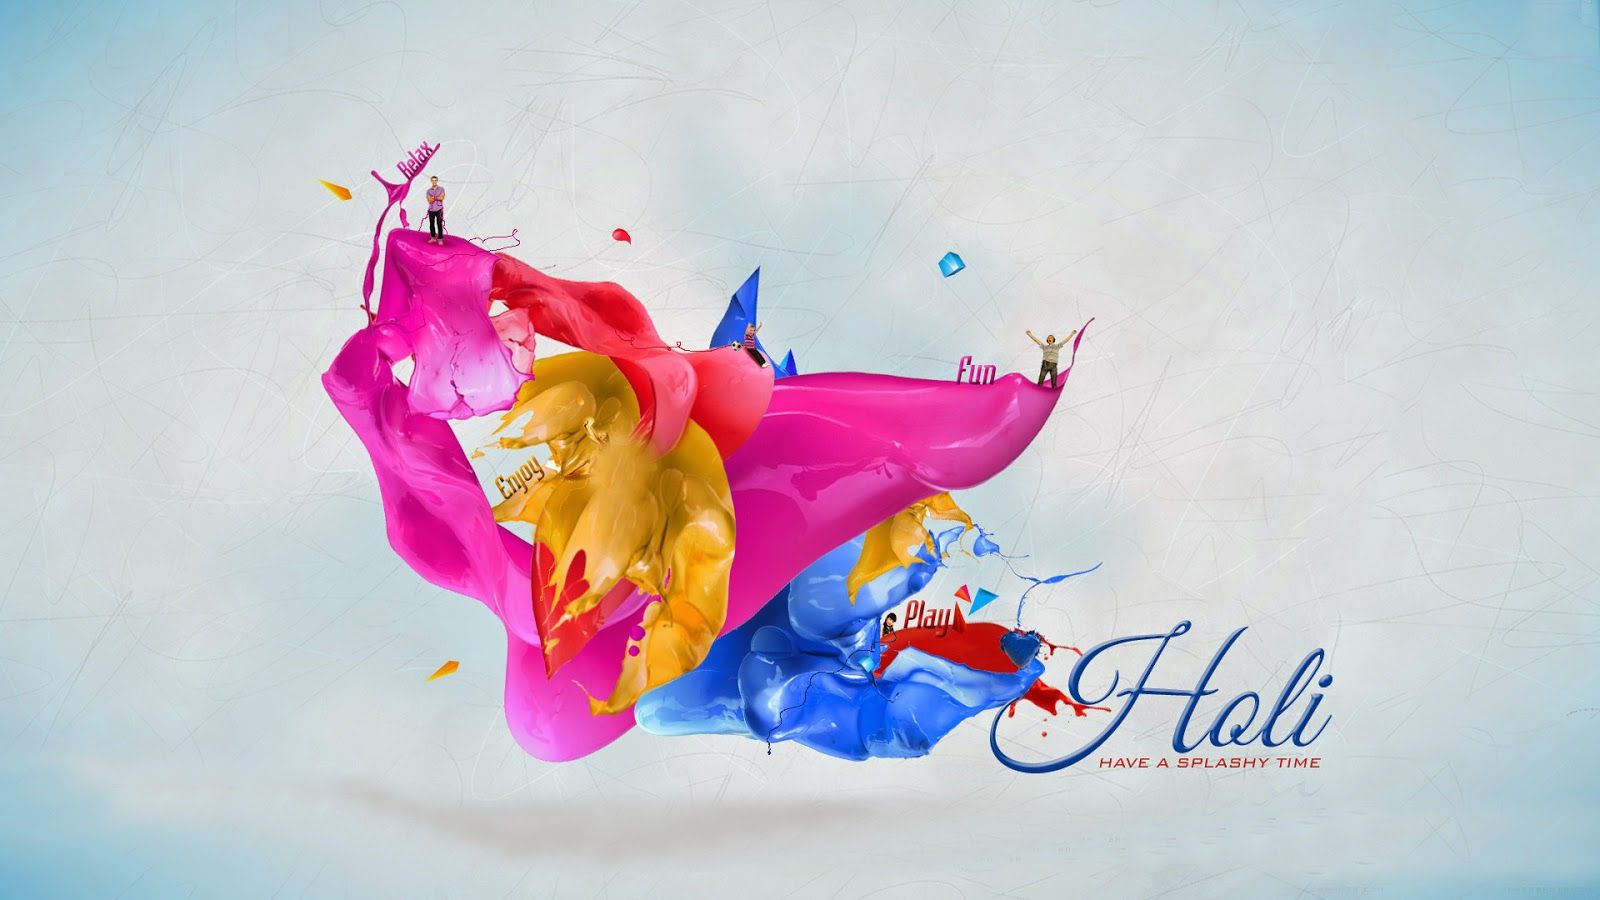 Free download Happy Holi in India Desktop Wallpaper Picture One